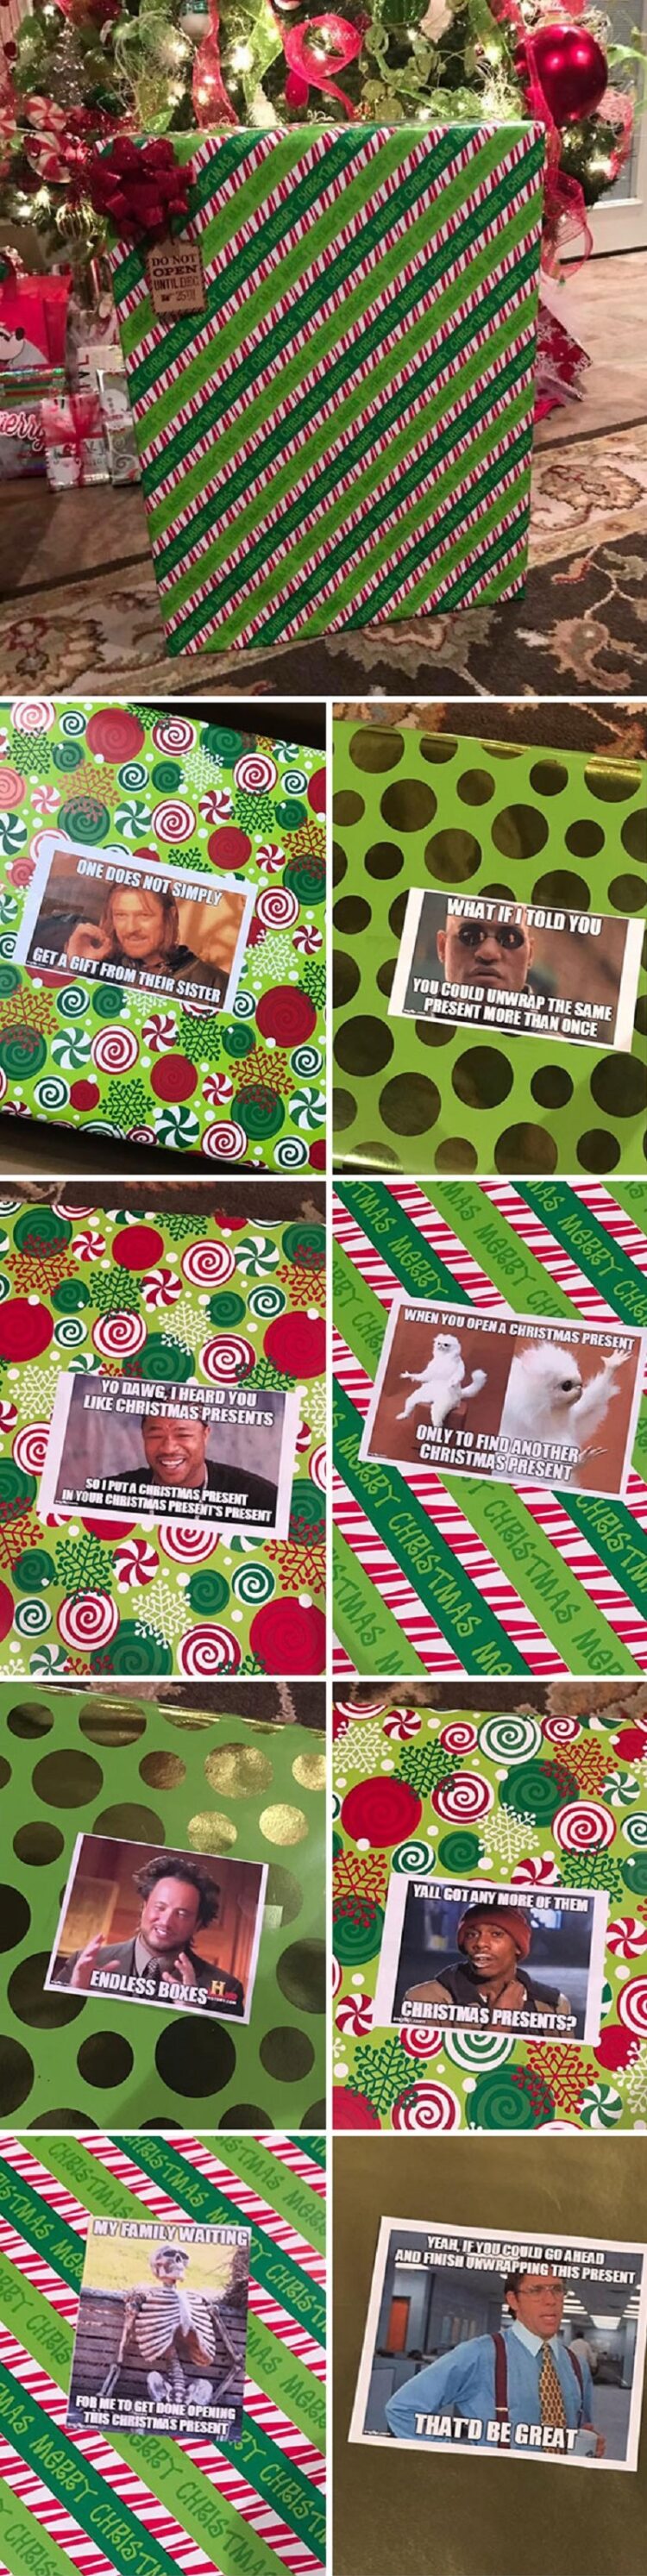 My Friend's Sister Had Some Fun With His Gift Wrapping.